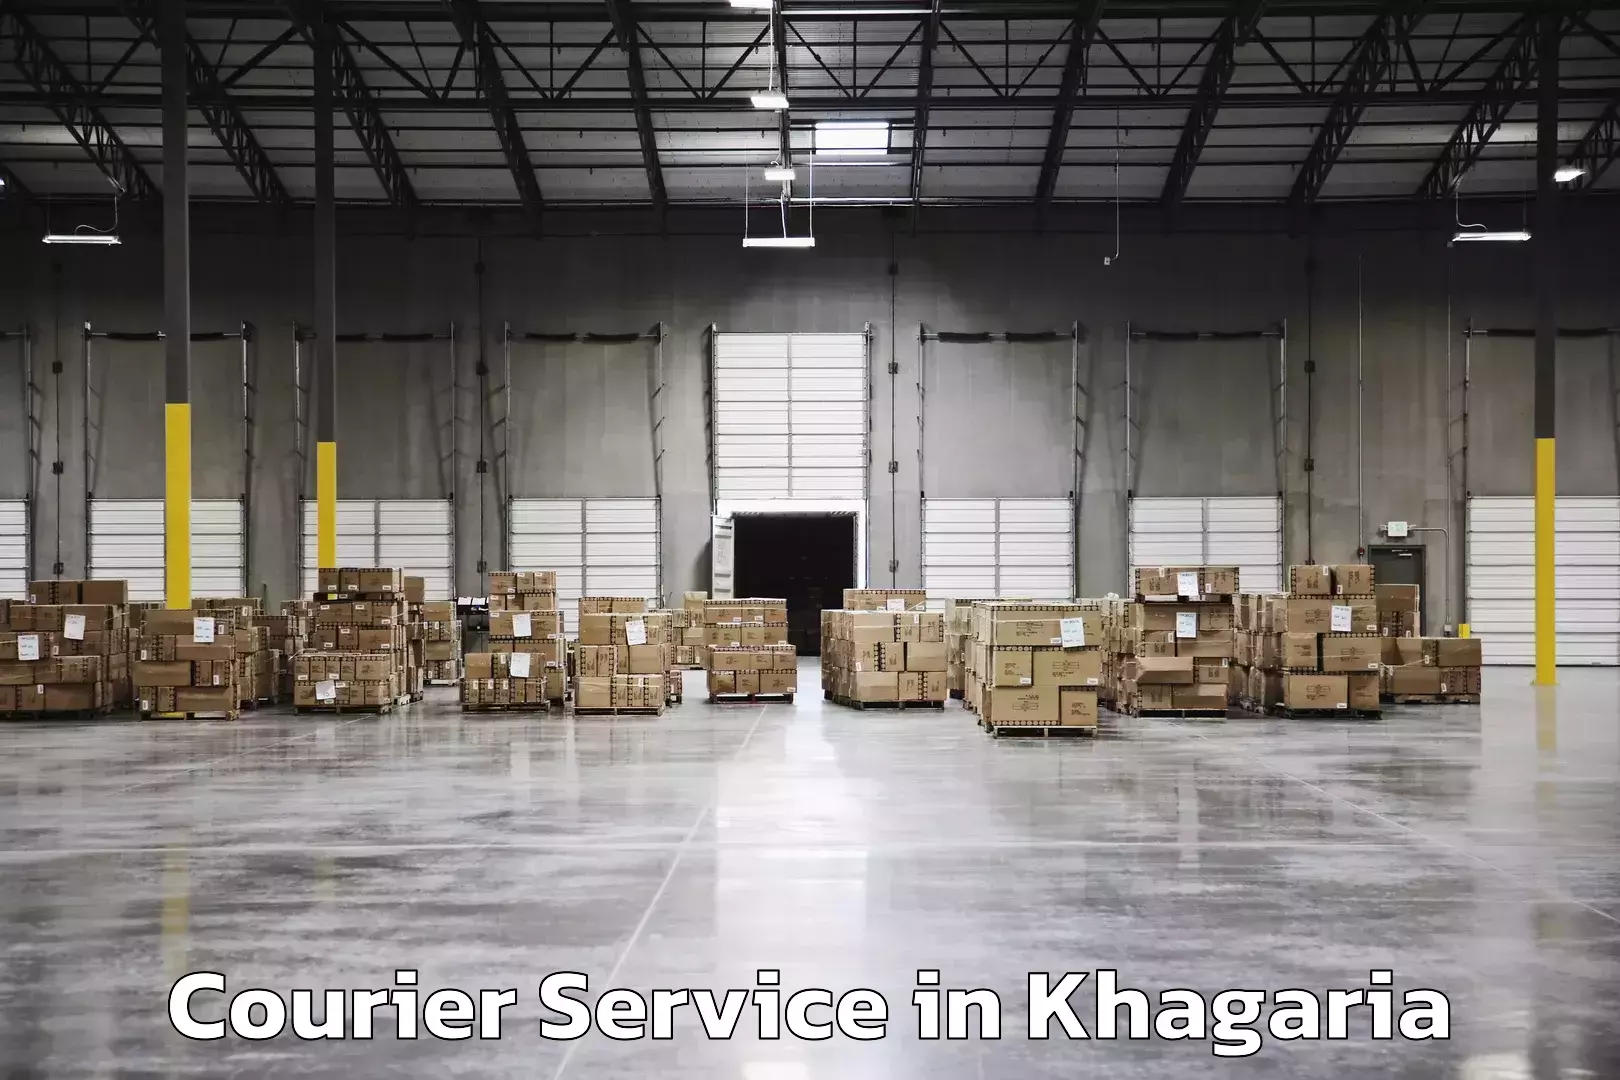 Courier service innovation in Khagaria